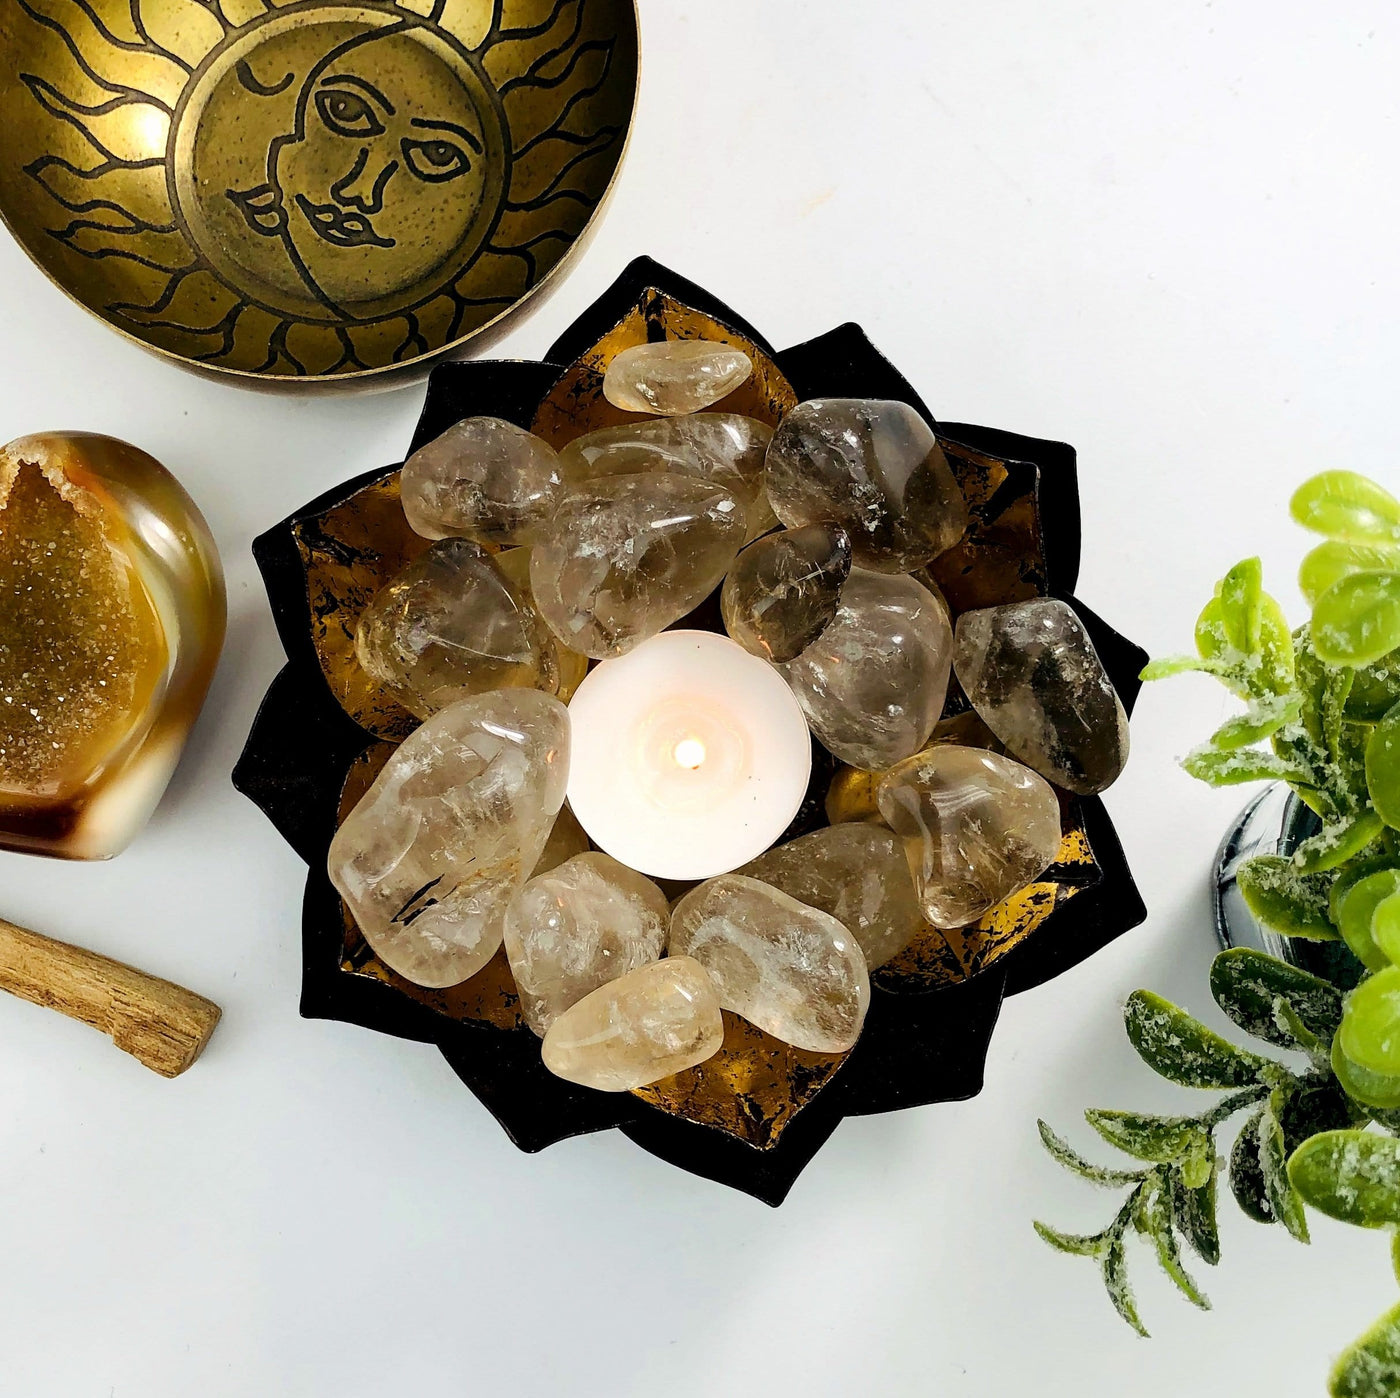 Smokey Quartz Tumbled Gemstones in a gold dish with candle